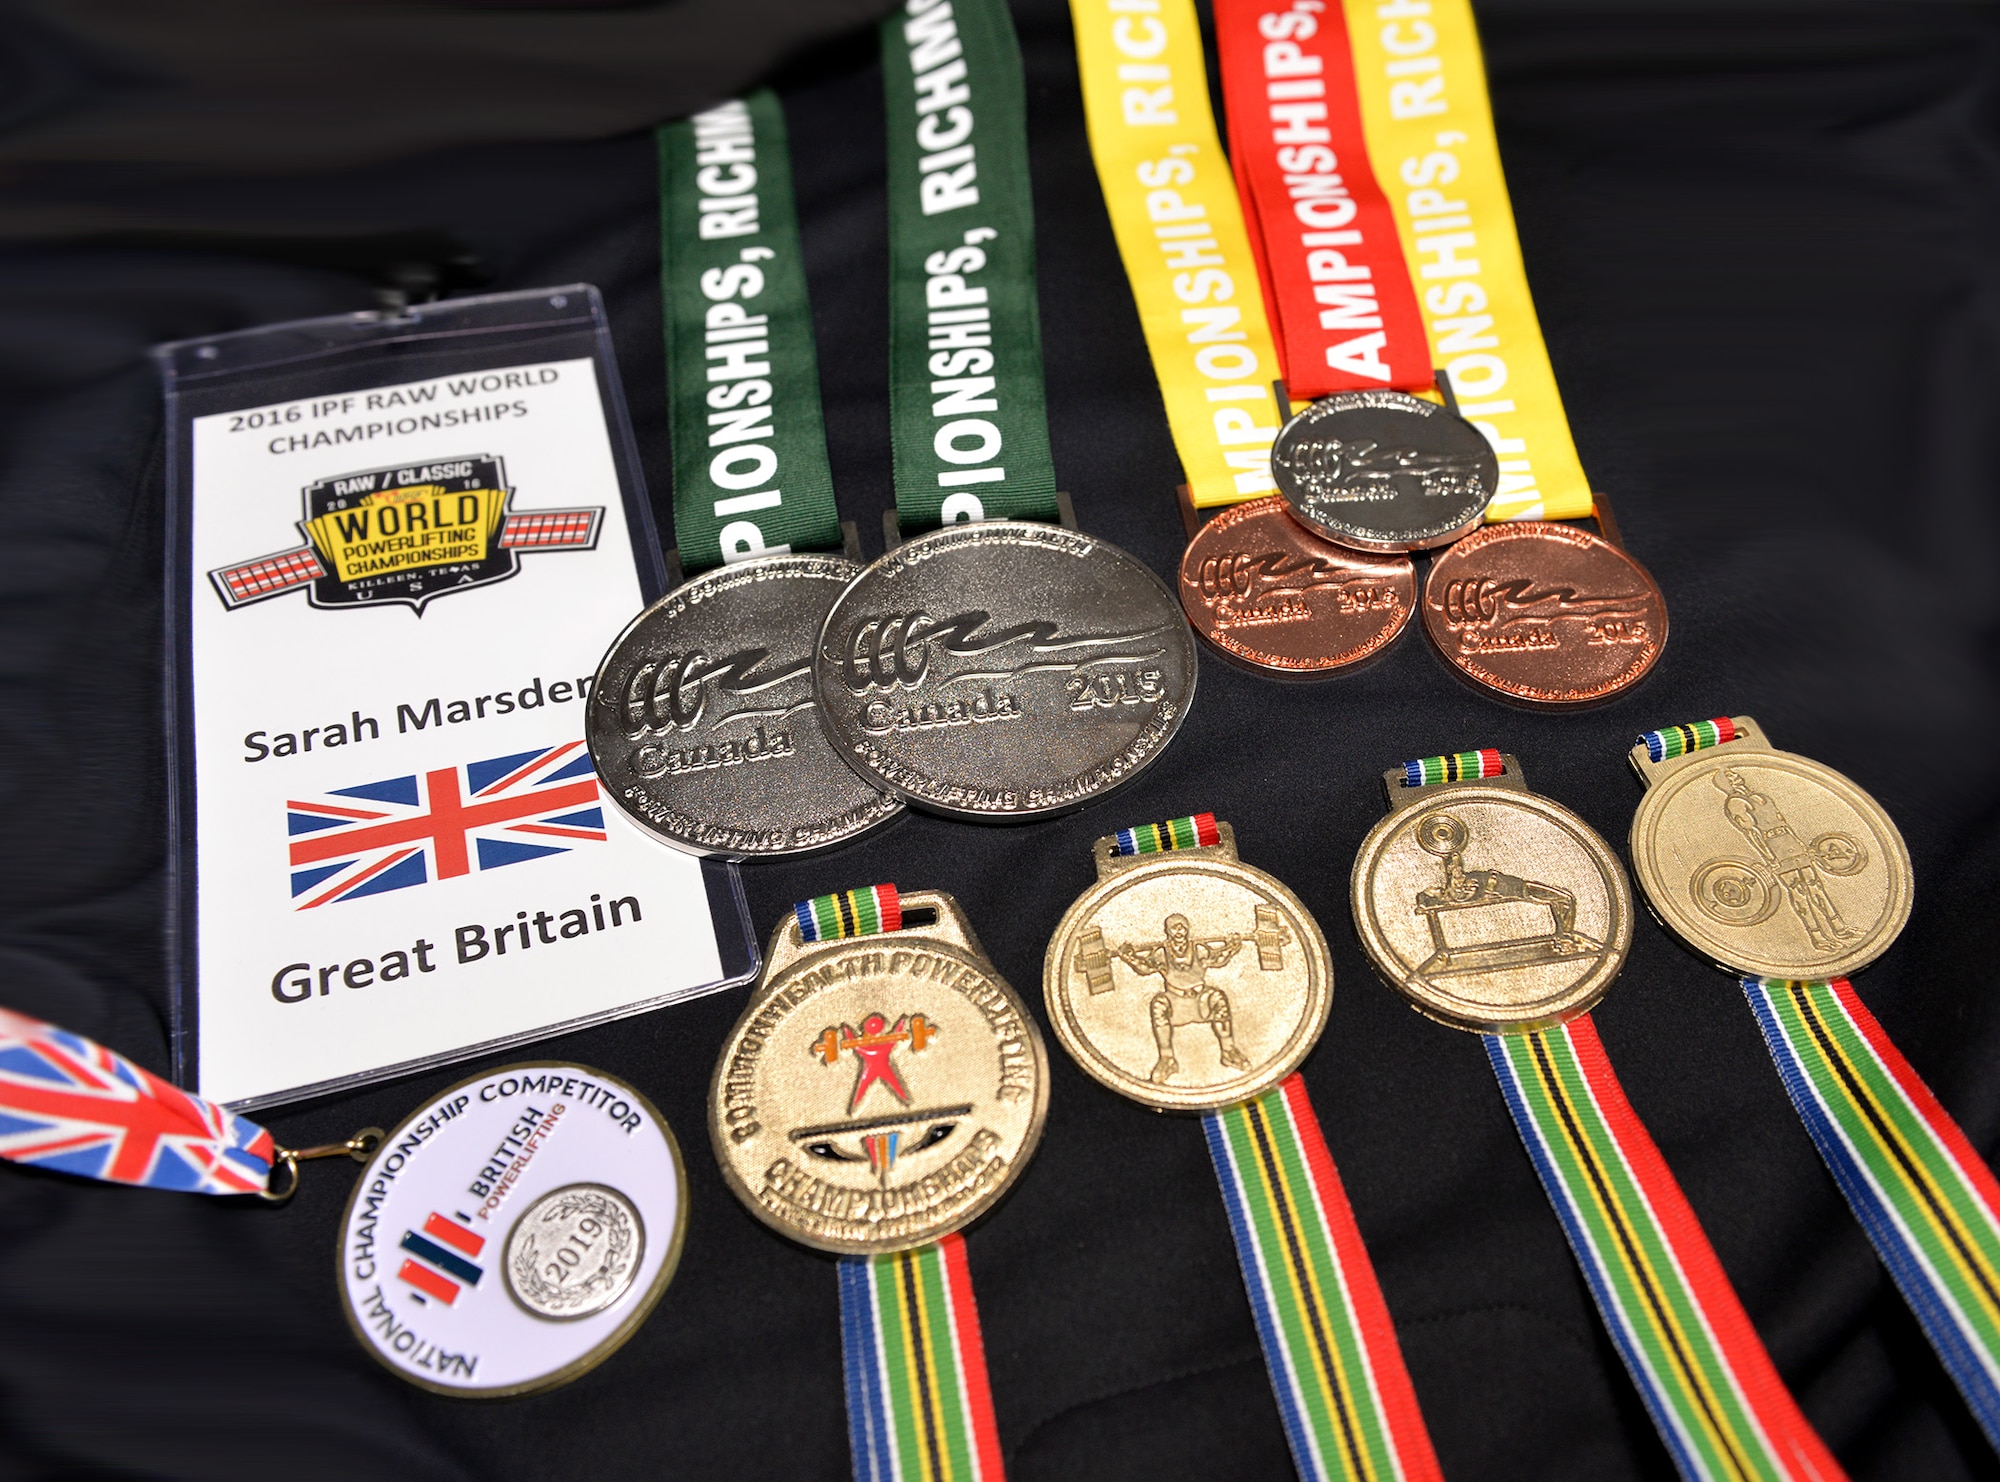 Gold, silver and bronze medals from powerlifting competitions around the world, earned by Sarah Marsden, 100th Civil Engineer Squadron environmental engineer, are displayed at RAF Mildenhall, England, March 19, 2019. Marsden, a self-confessed adrenaline junkie, has previously done sports and activities including motor racing, karate, hockey and sky diving. She is now a world champion powerlifter and has earned medals in competitions all around the world. (U.S. Air Force photo by Karen Abeyasekere)